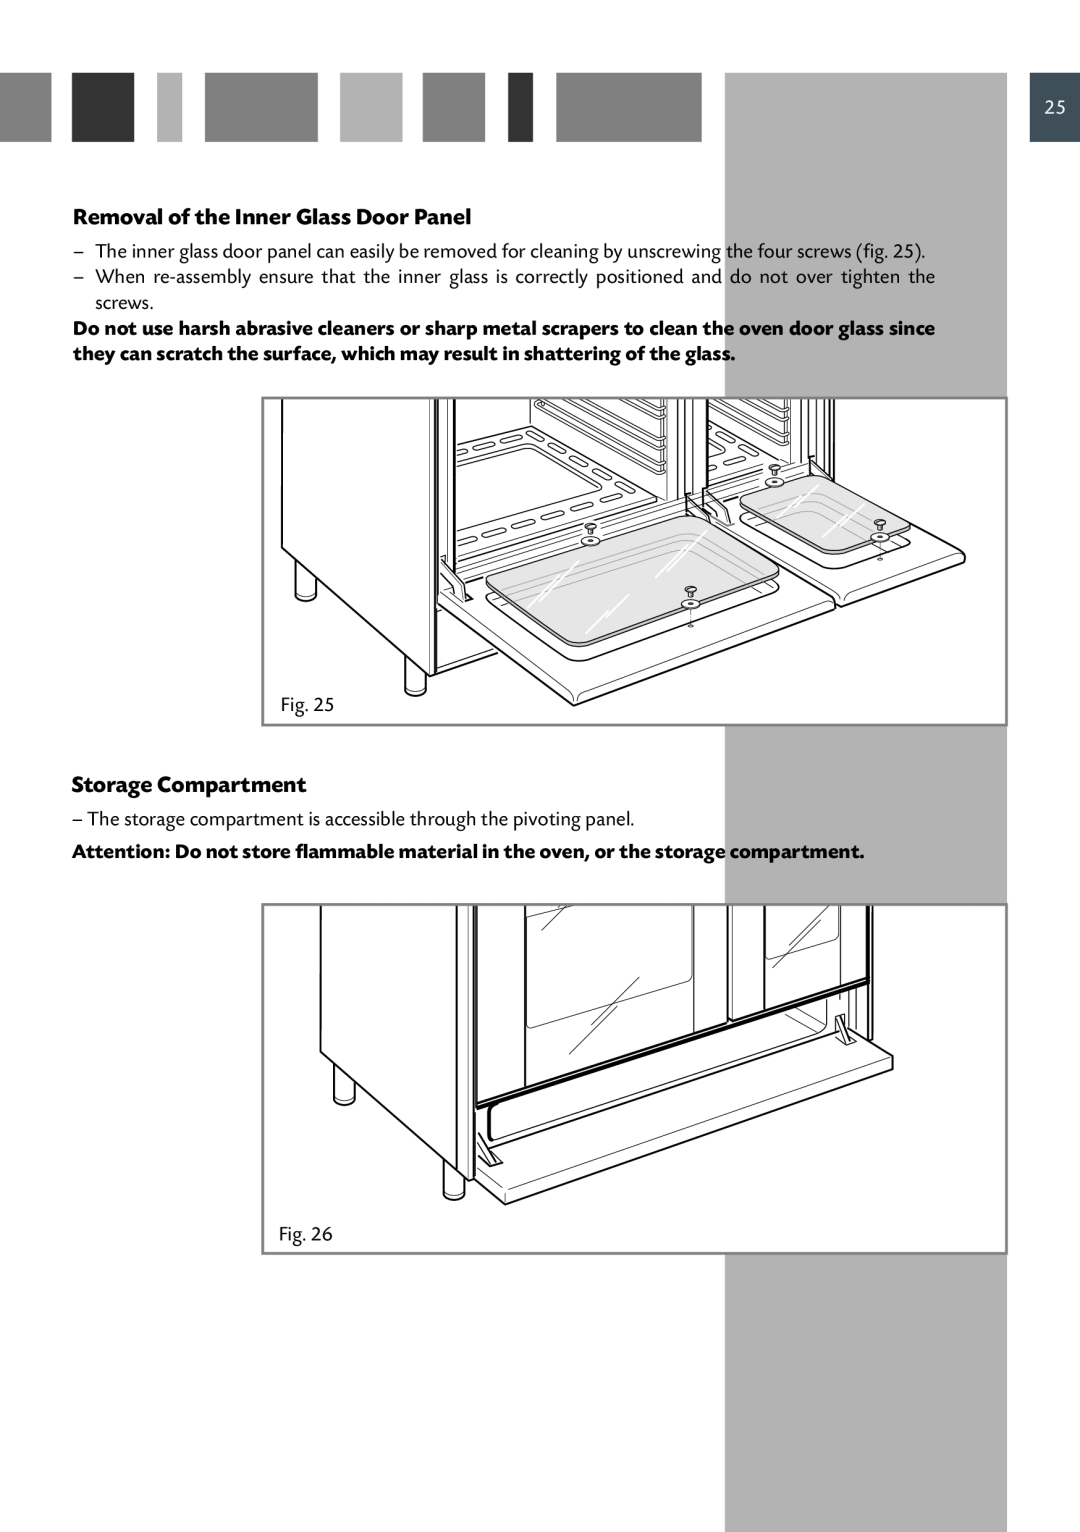 CDA RC 9620 manual Removal of the Inner Glass Door Panel, Storage Compartment 